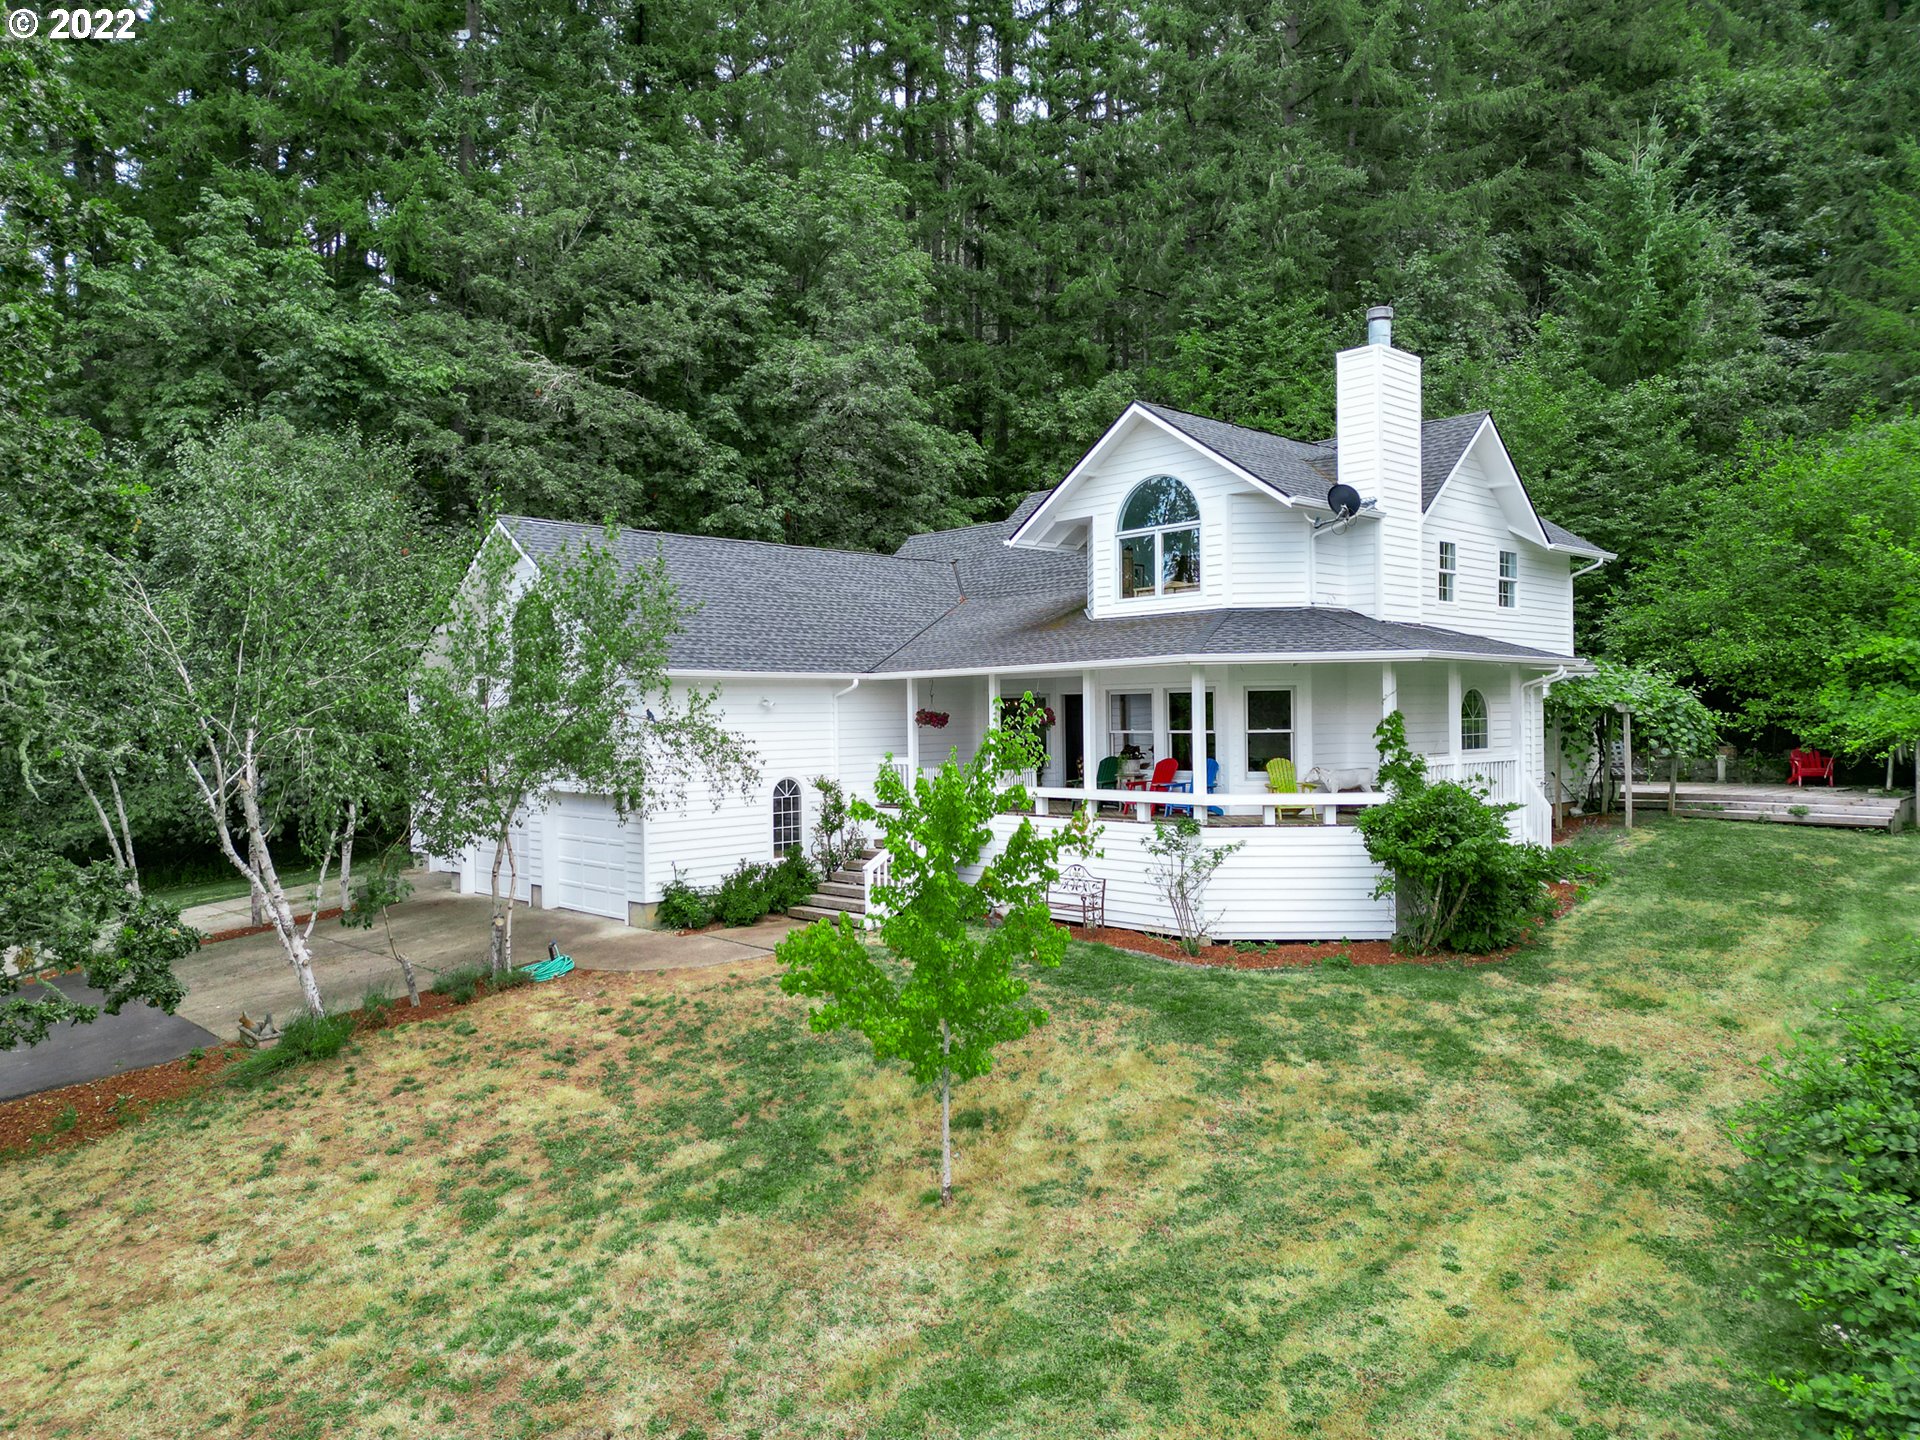 Rare find breath taking property. Amazing 5 acres backs up to acres of BLM property. The main house has two owners suites on the first floor with a nice open floor plan. New wood stove 2019, new roof 2019, new heat pump 2018, new submersible pump in well 2020 and new electrical lines and pipes from well to pump house. Guest house  850 sqft with bedroom, two full bathroom, one car garage and bonus hobby room. Great for multi generation living it provides a nice separation of space.